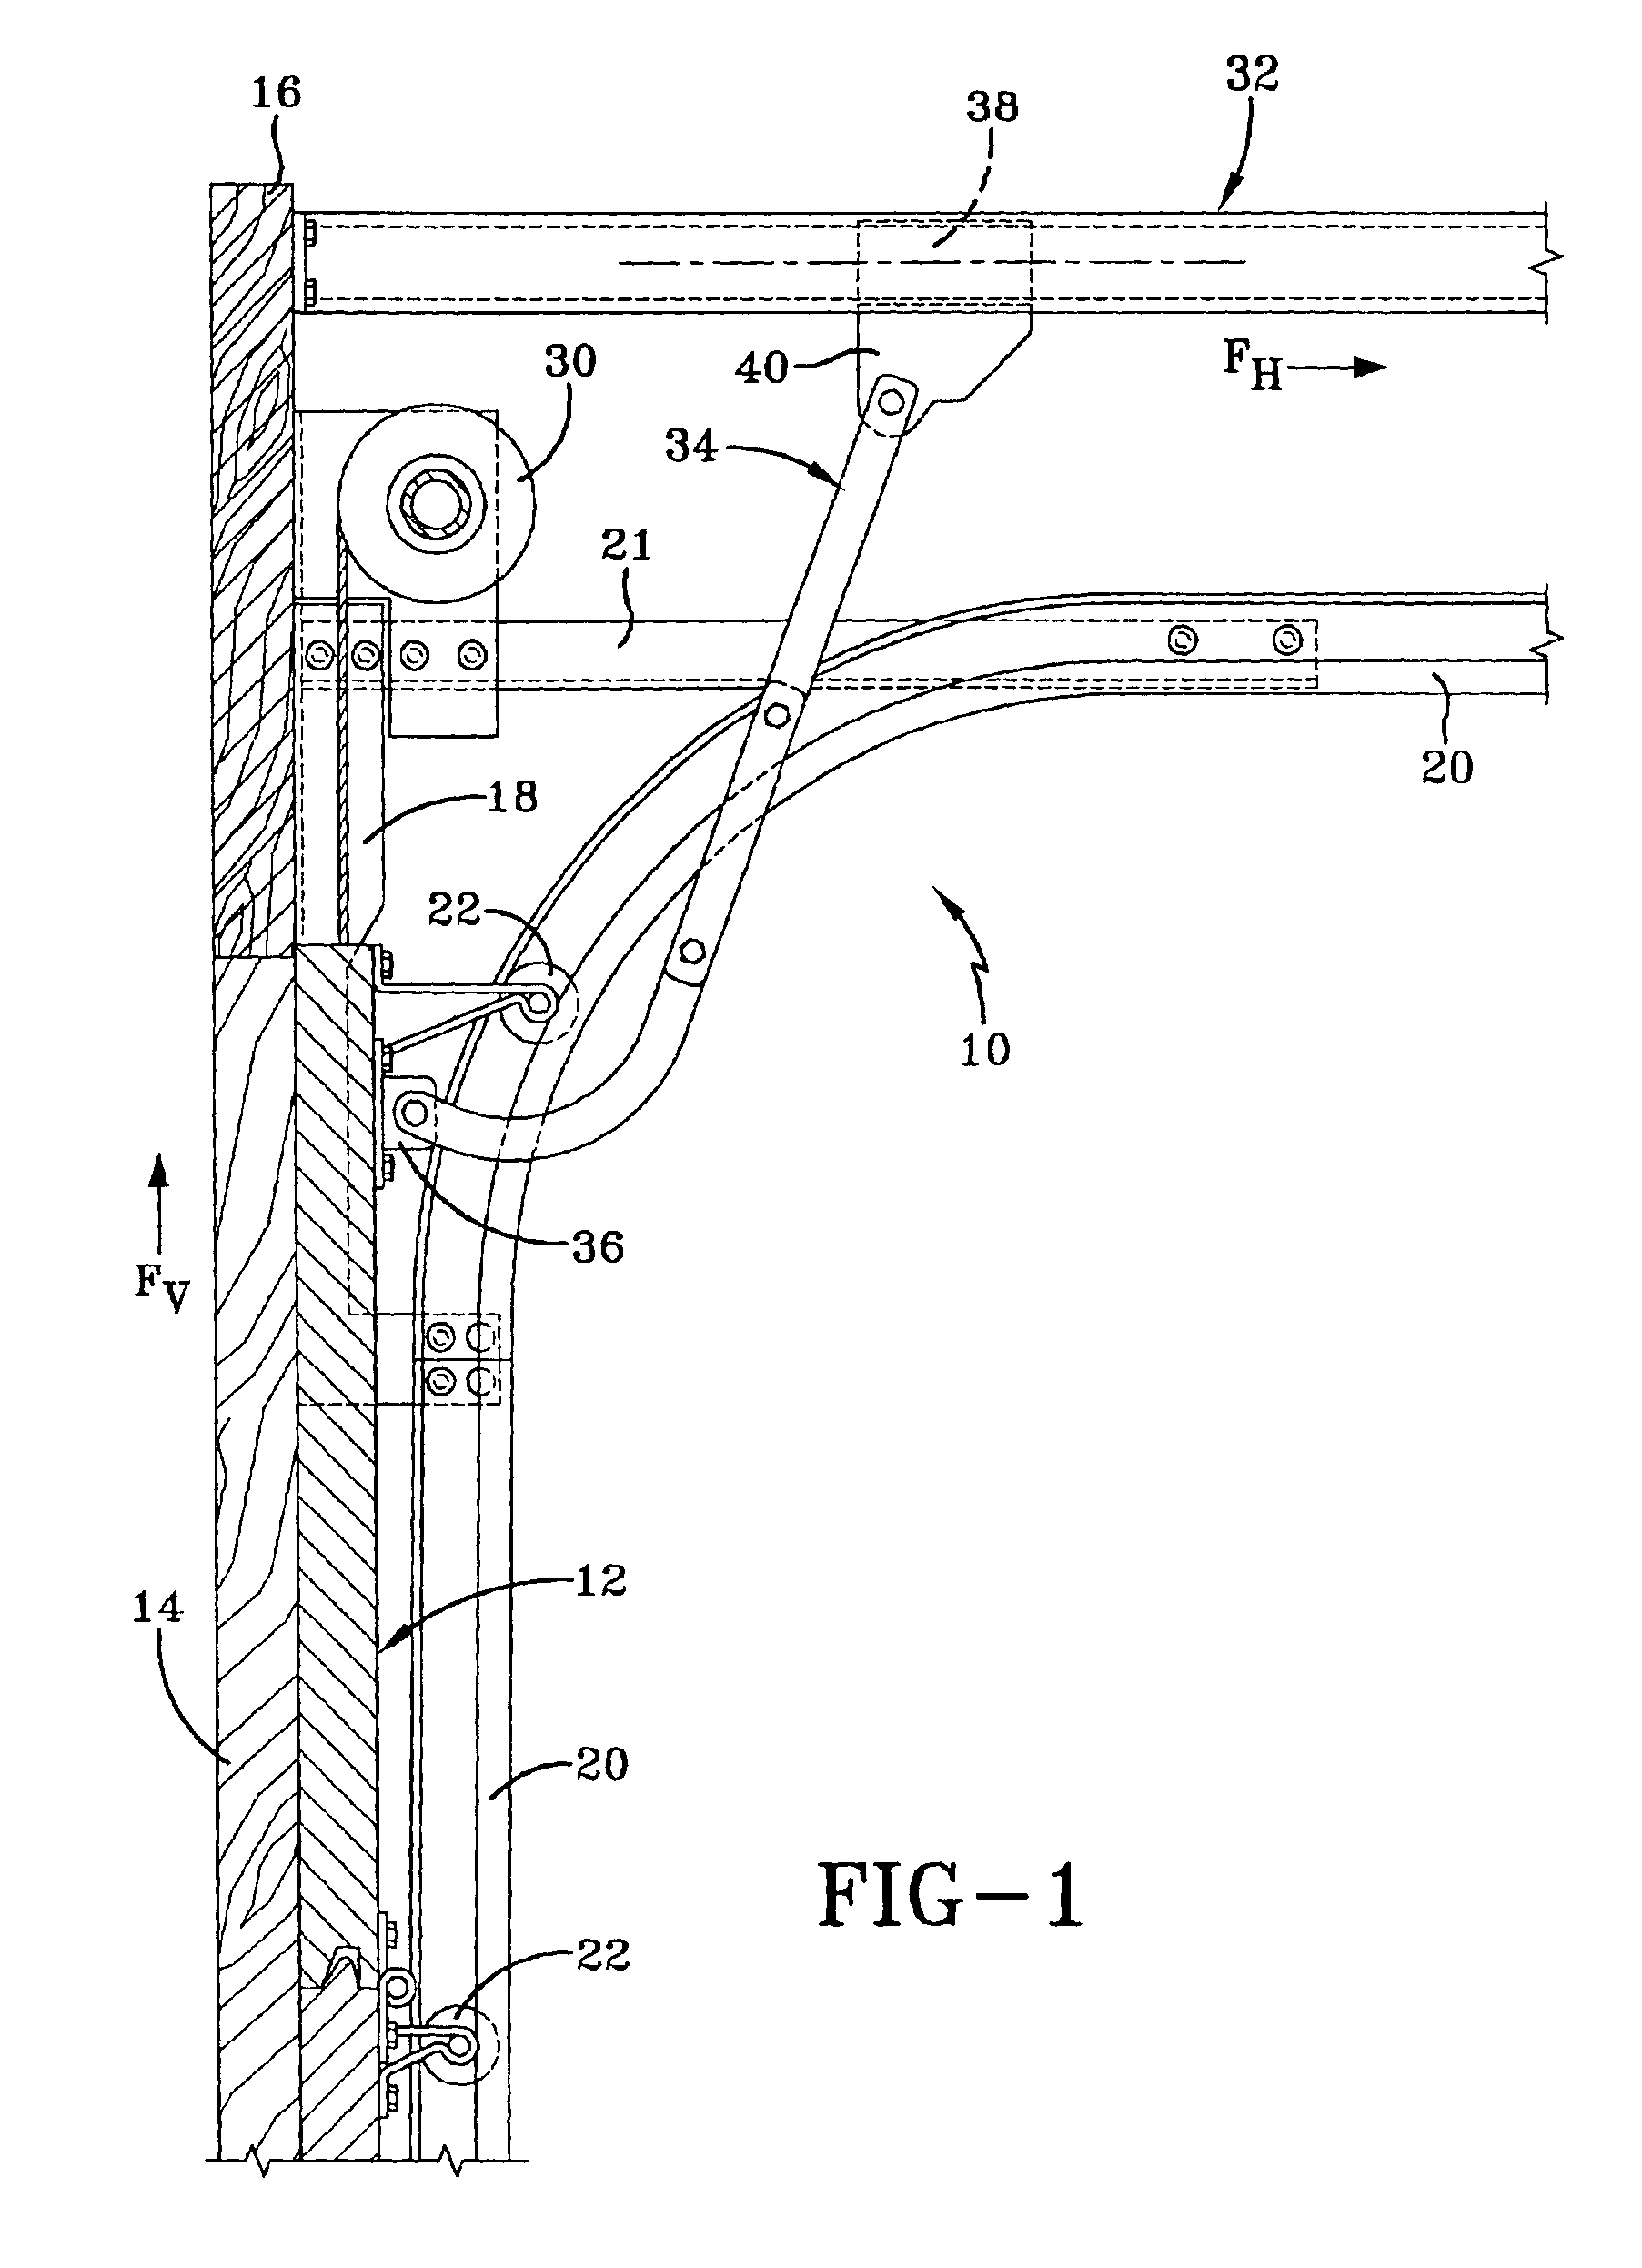 System and related methods for sensing forces on a movable barrier